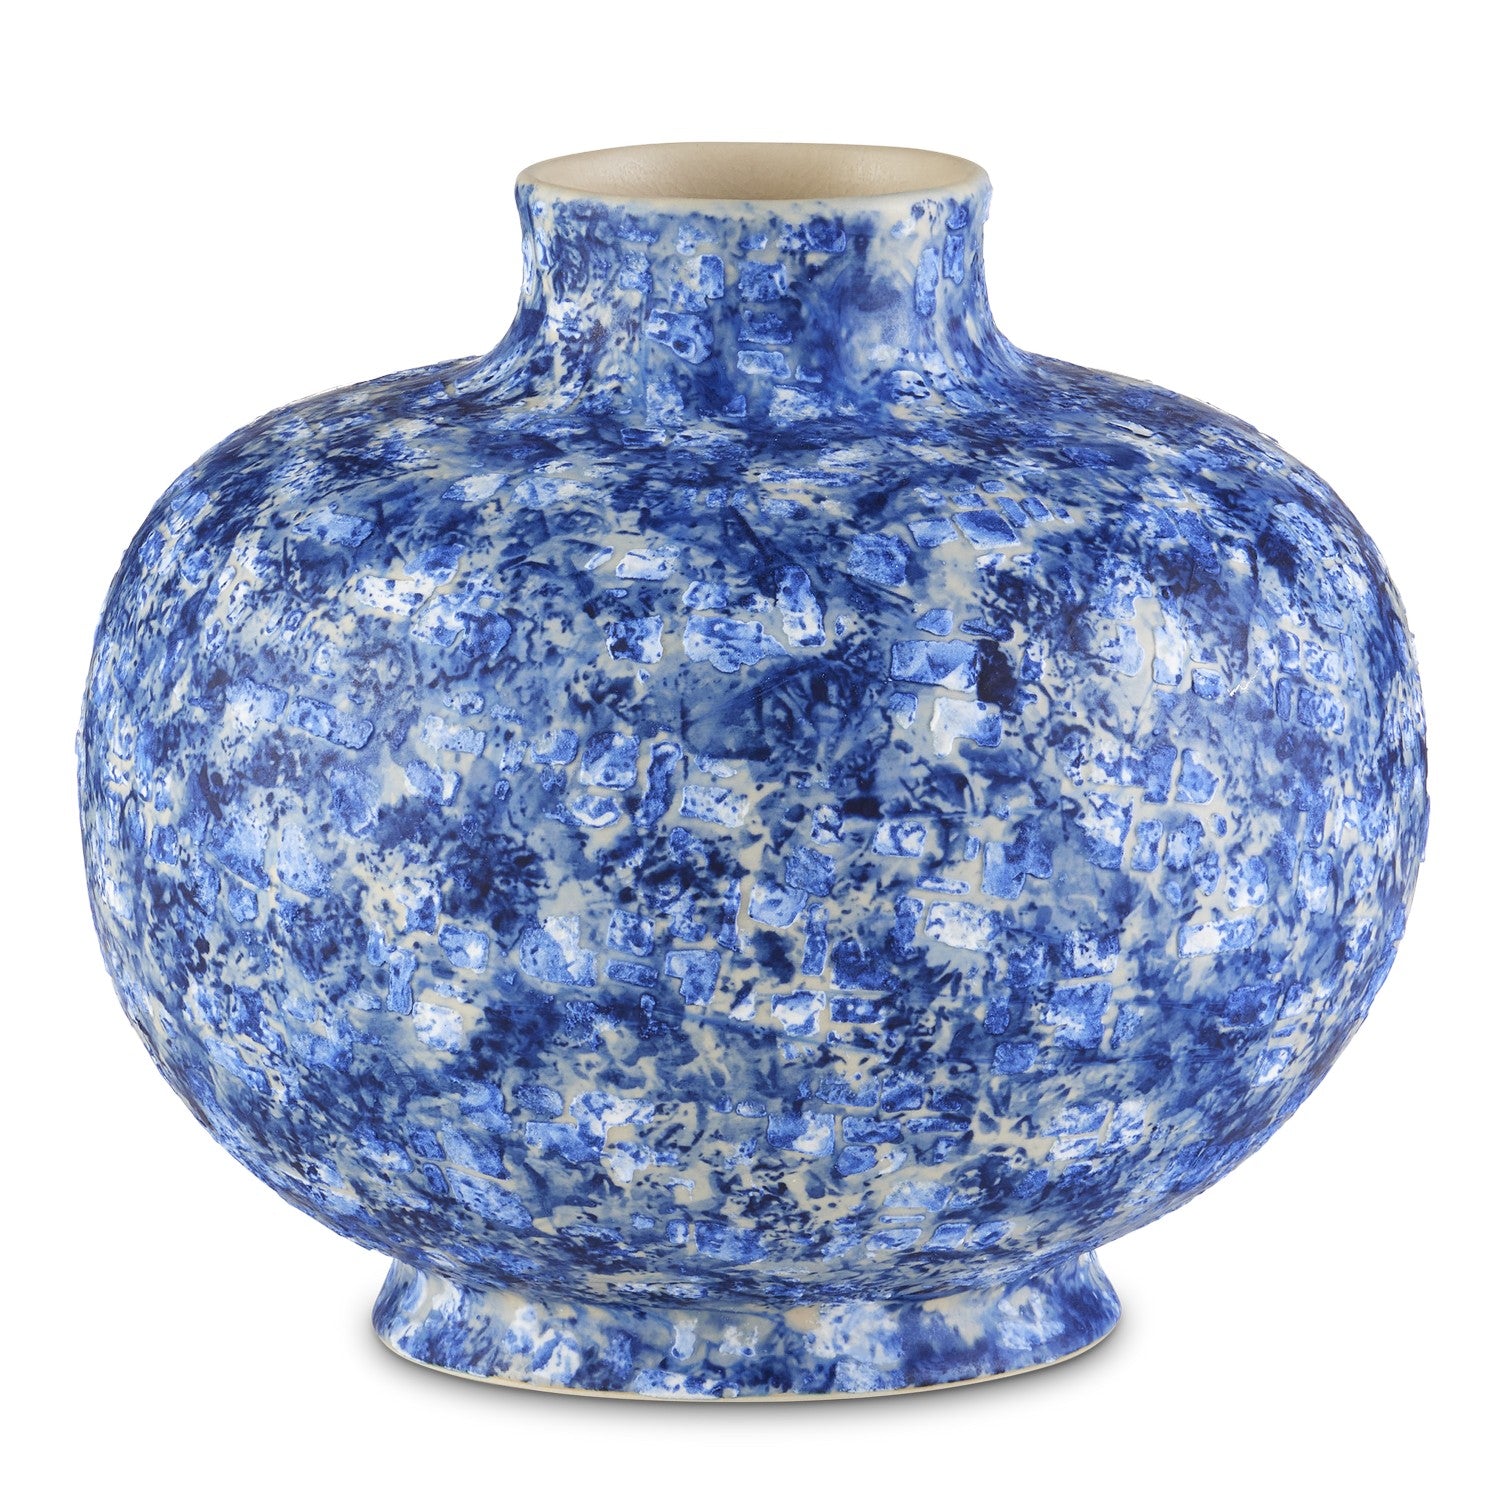 Currey and Company - 1200-0750 - Vase - Blue/White